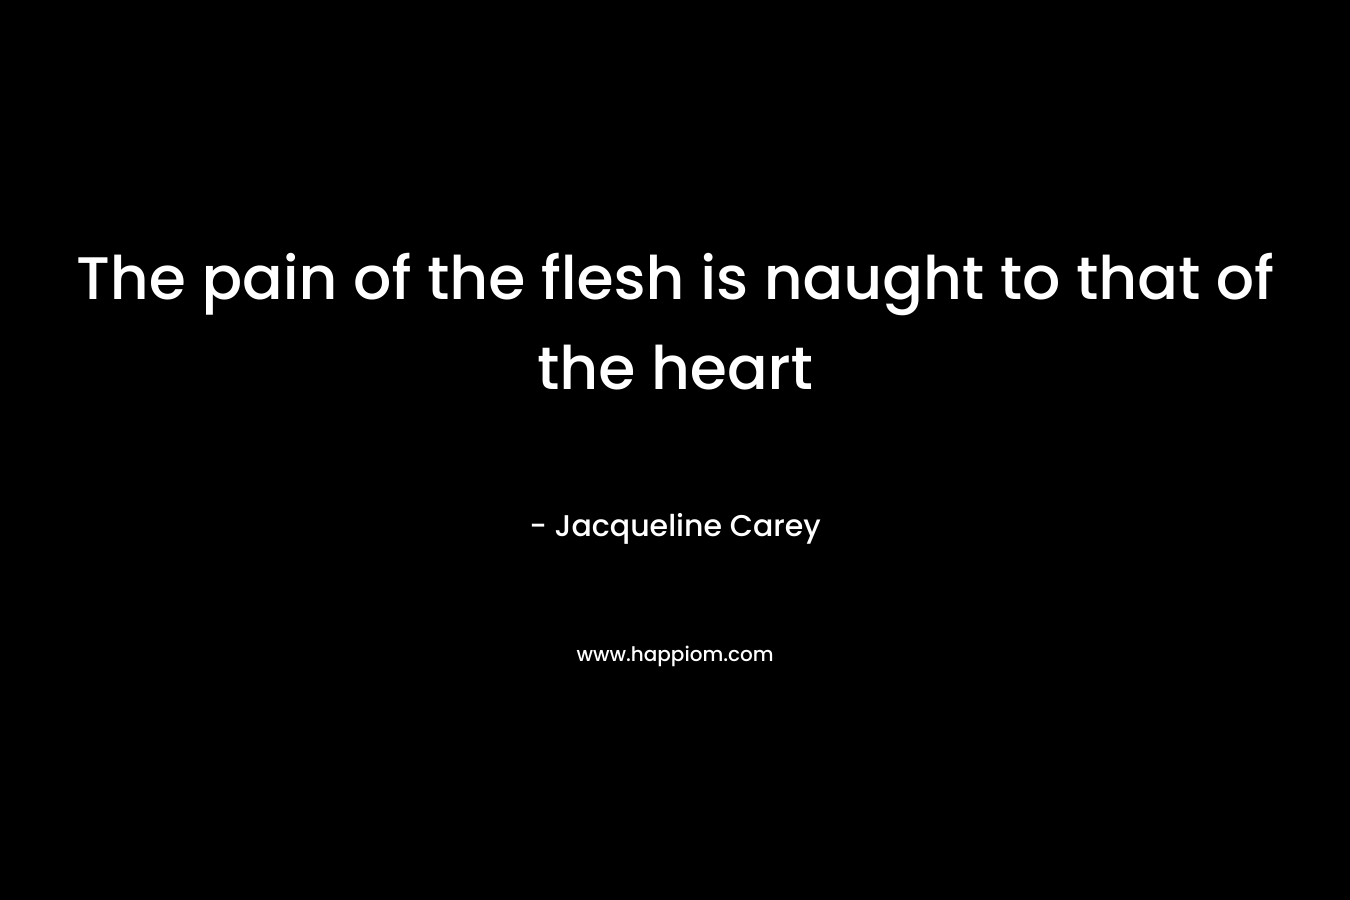 The pain of the flesh is naught to that of the heart